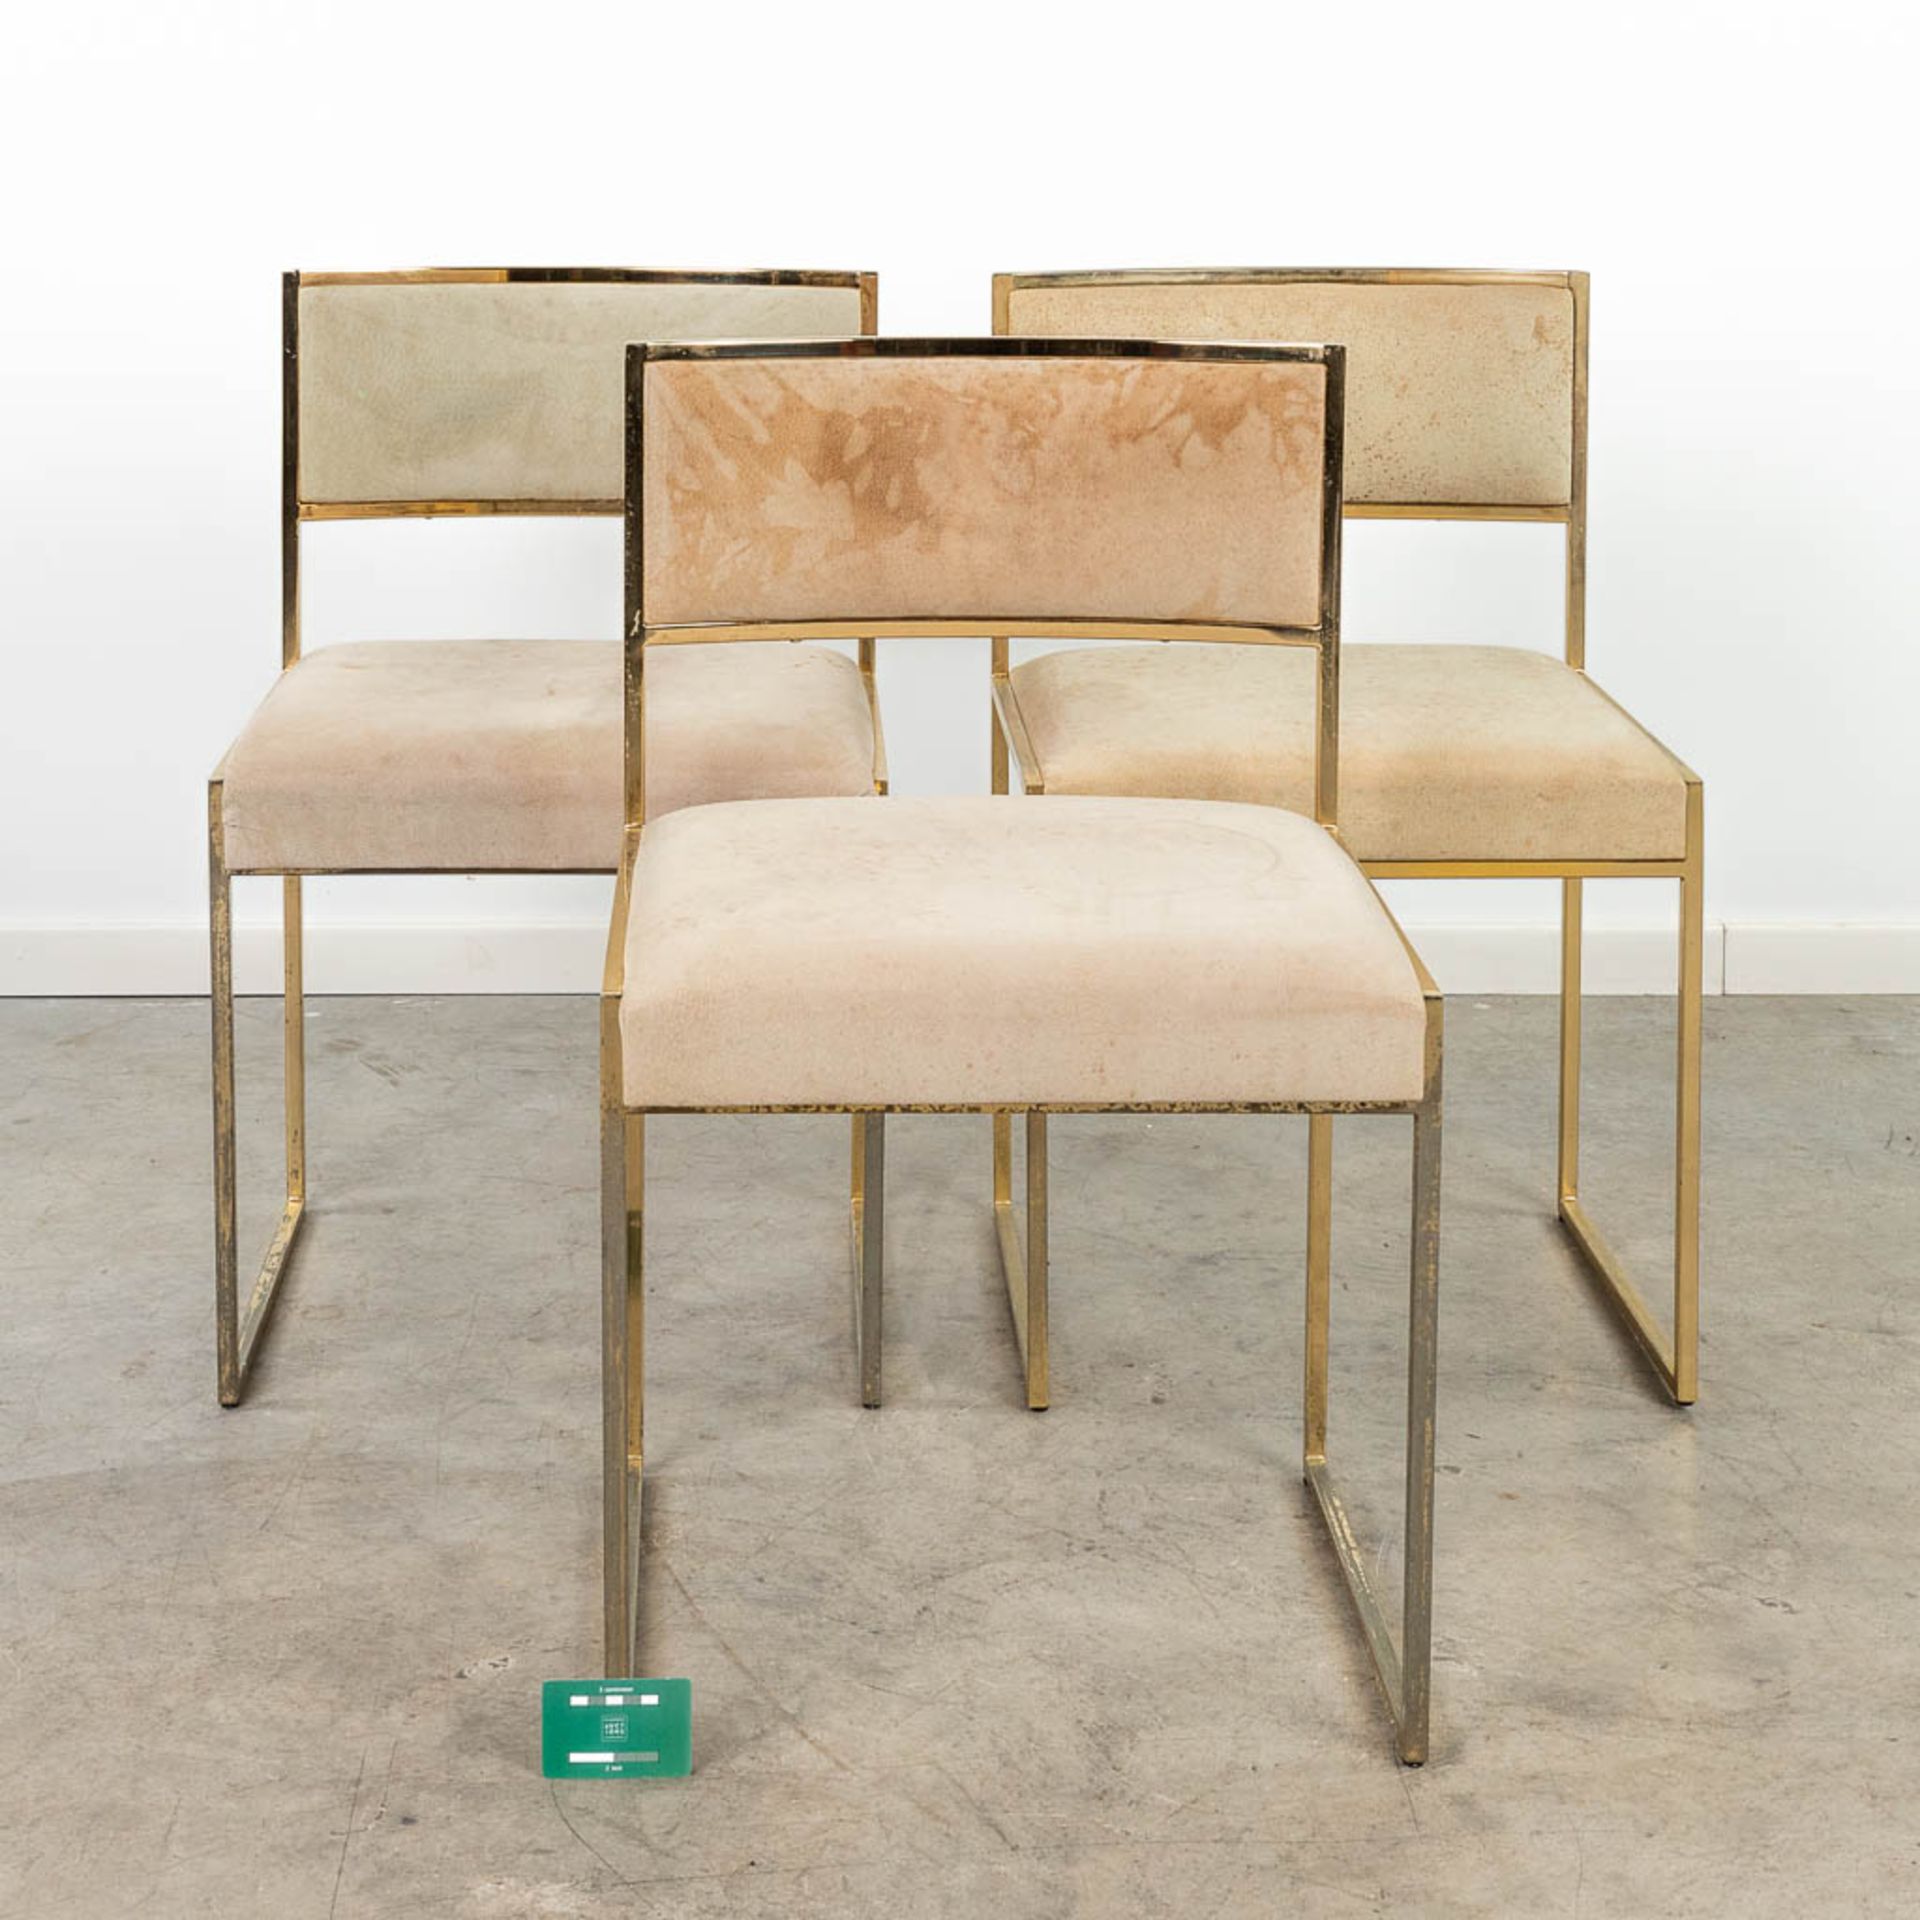 Willy RIZZO (1928-2013)ÊSet of 3 chairs, made of gold plated brass. Circa 1970. (49 x 48 x 78cm) - Image 2 of 14